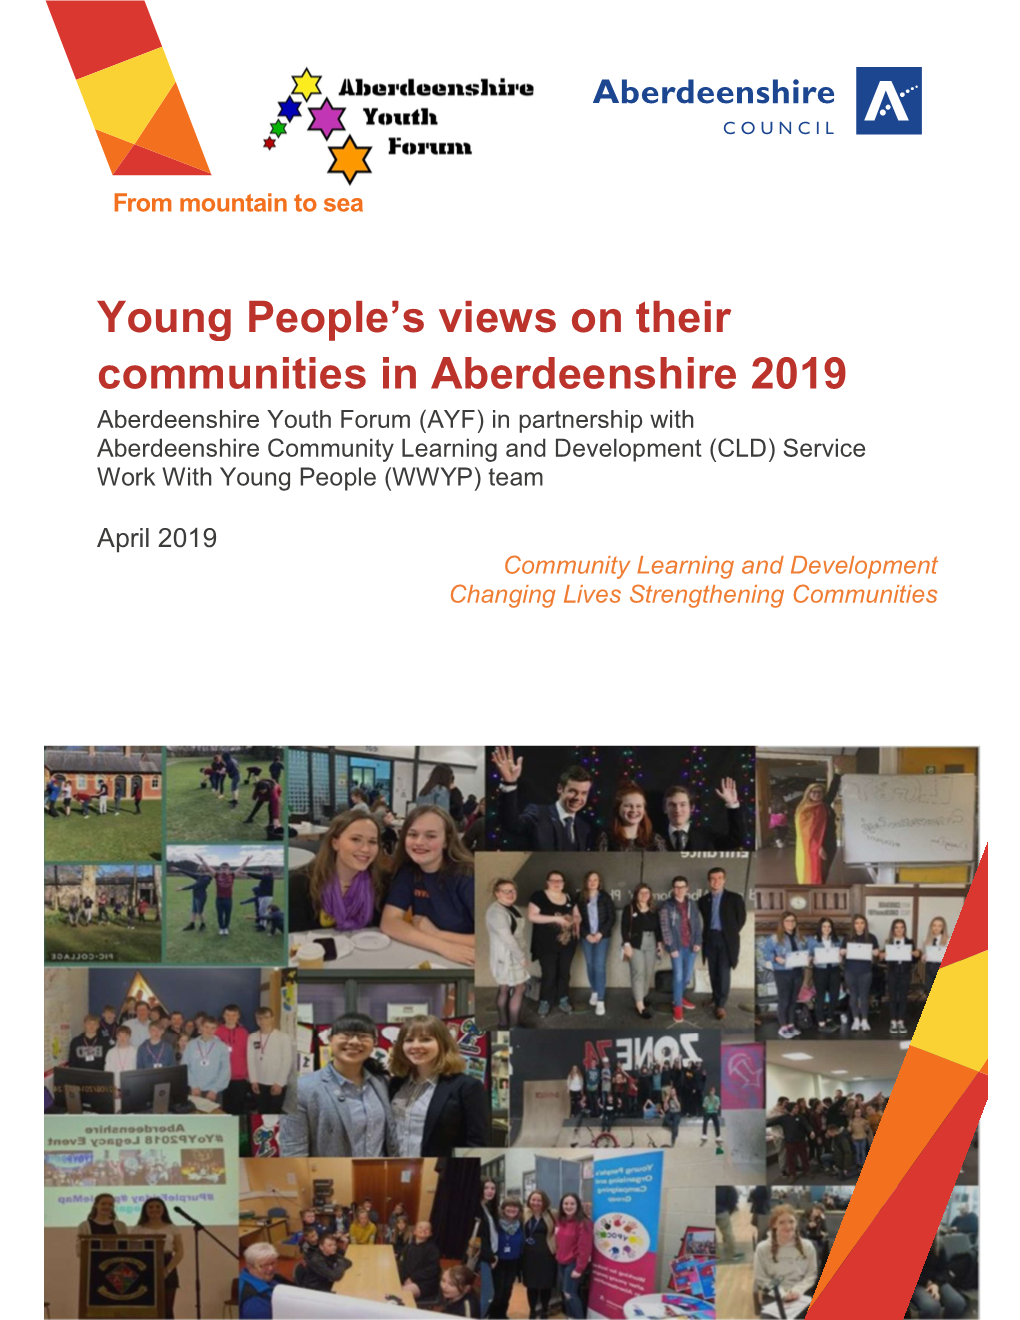 Young People's Views on Their Communities in Aberdeenshire 2019